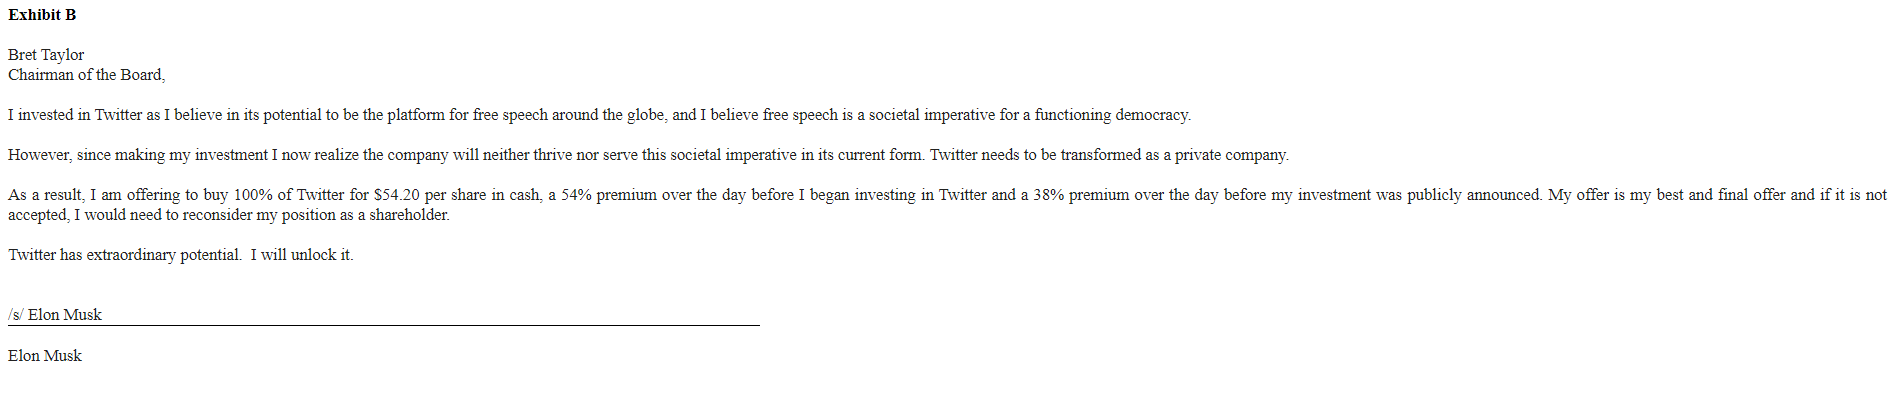 Elon Musk offers to buy all of Twitter for 54.20 per share.